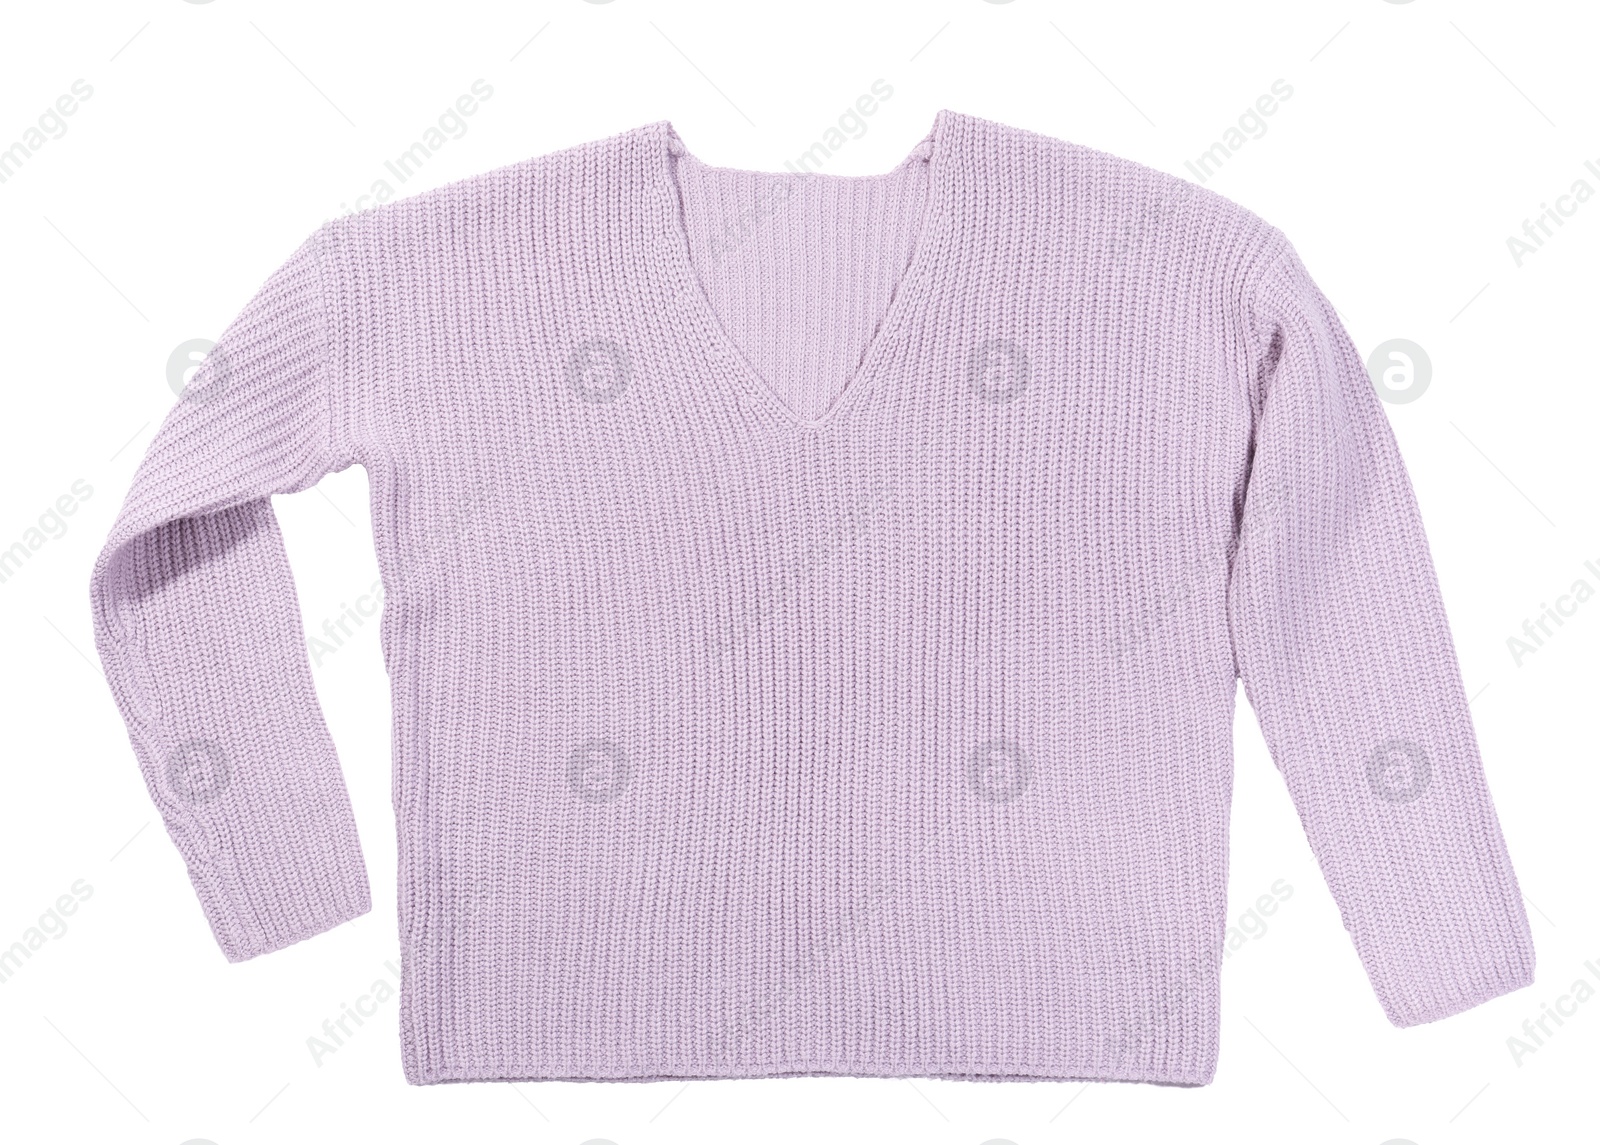 Photo of Cozy warm sweater on white background, top view